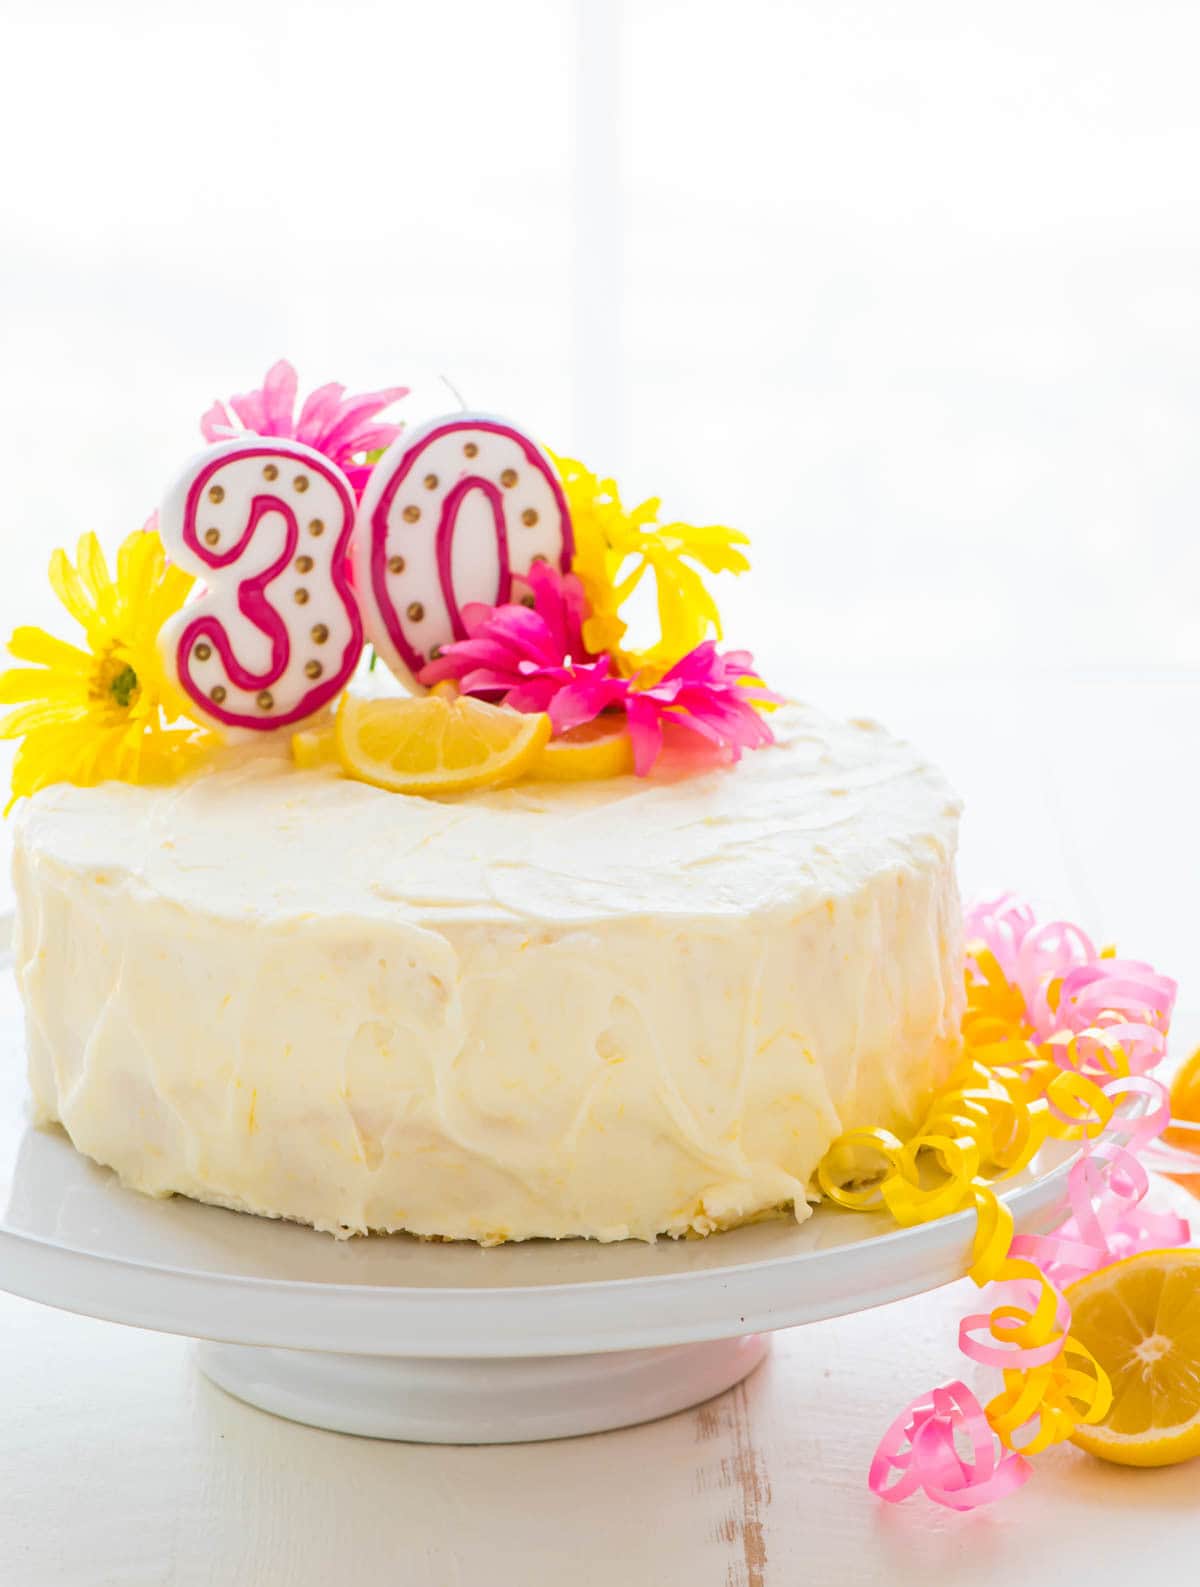 Lemon layer cake with lemon cream cheese frosting on a cake stand with birthday candles, ribbons and fresh flowers